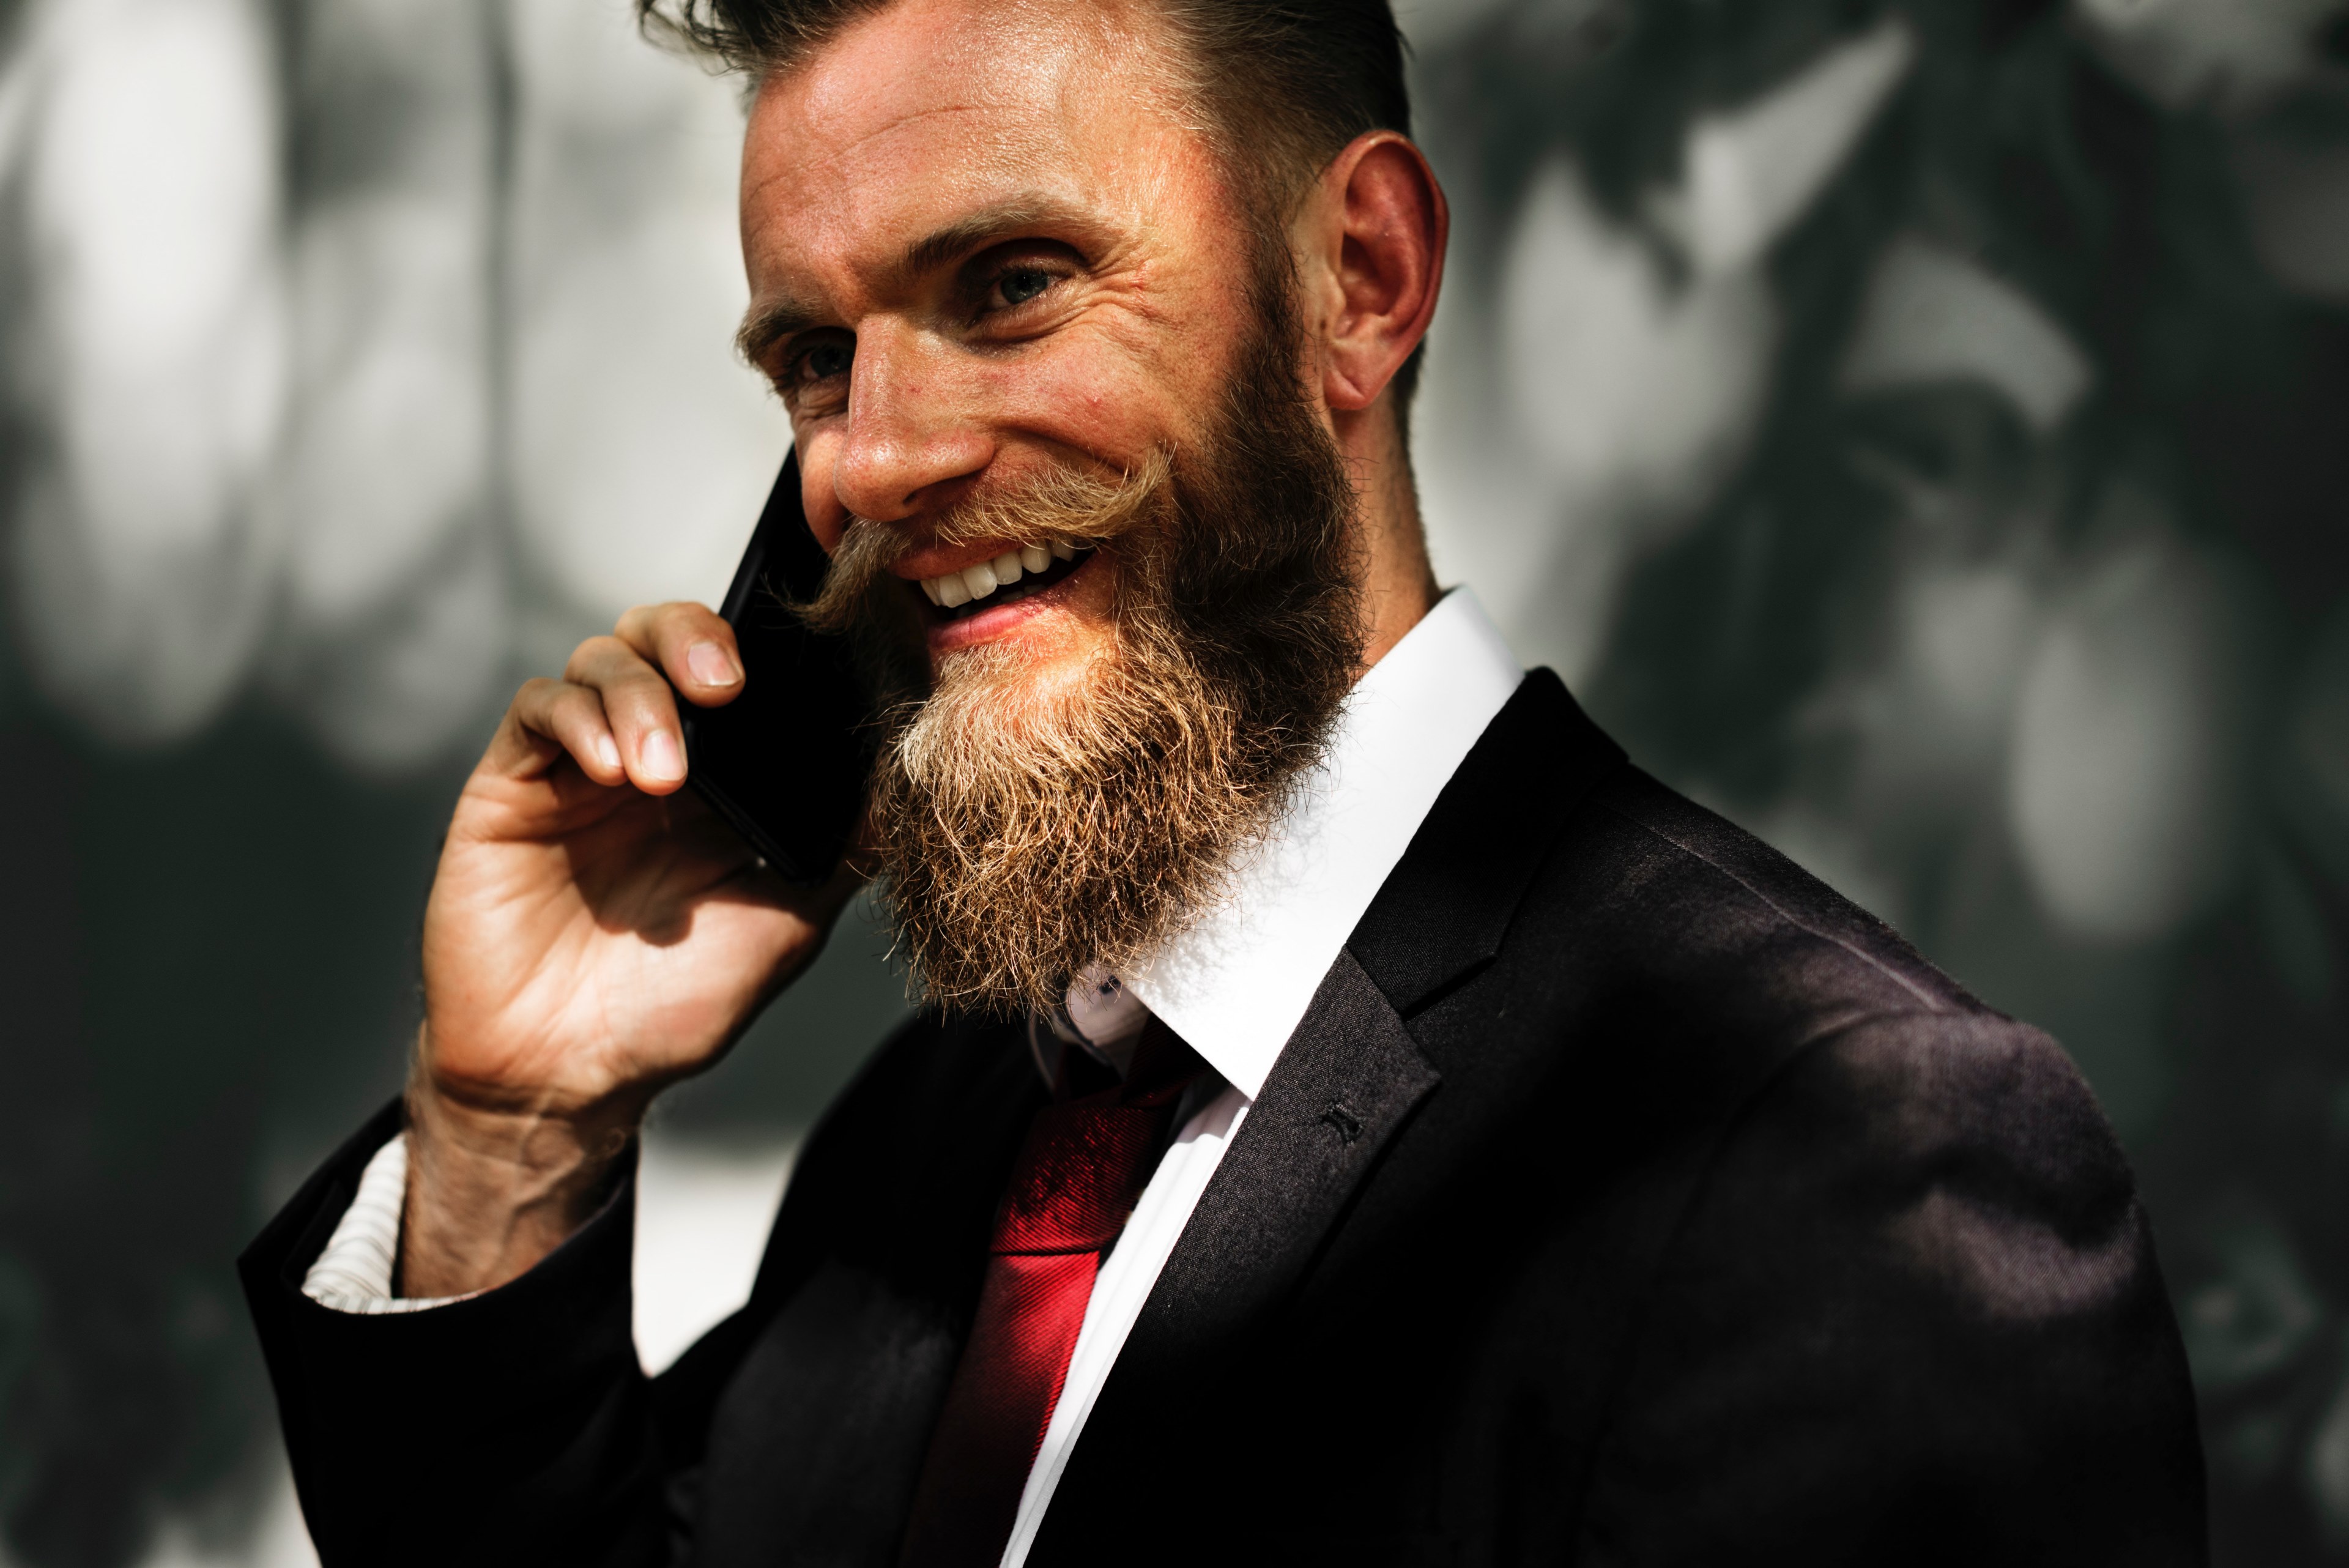 #3840x2563 A Bearded Man In A Black Suit Smiling While , HD Wallpaper & Backgrounds